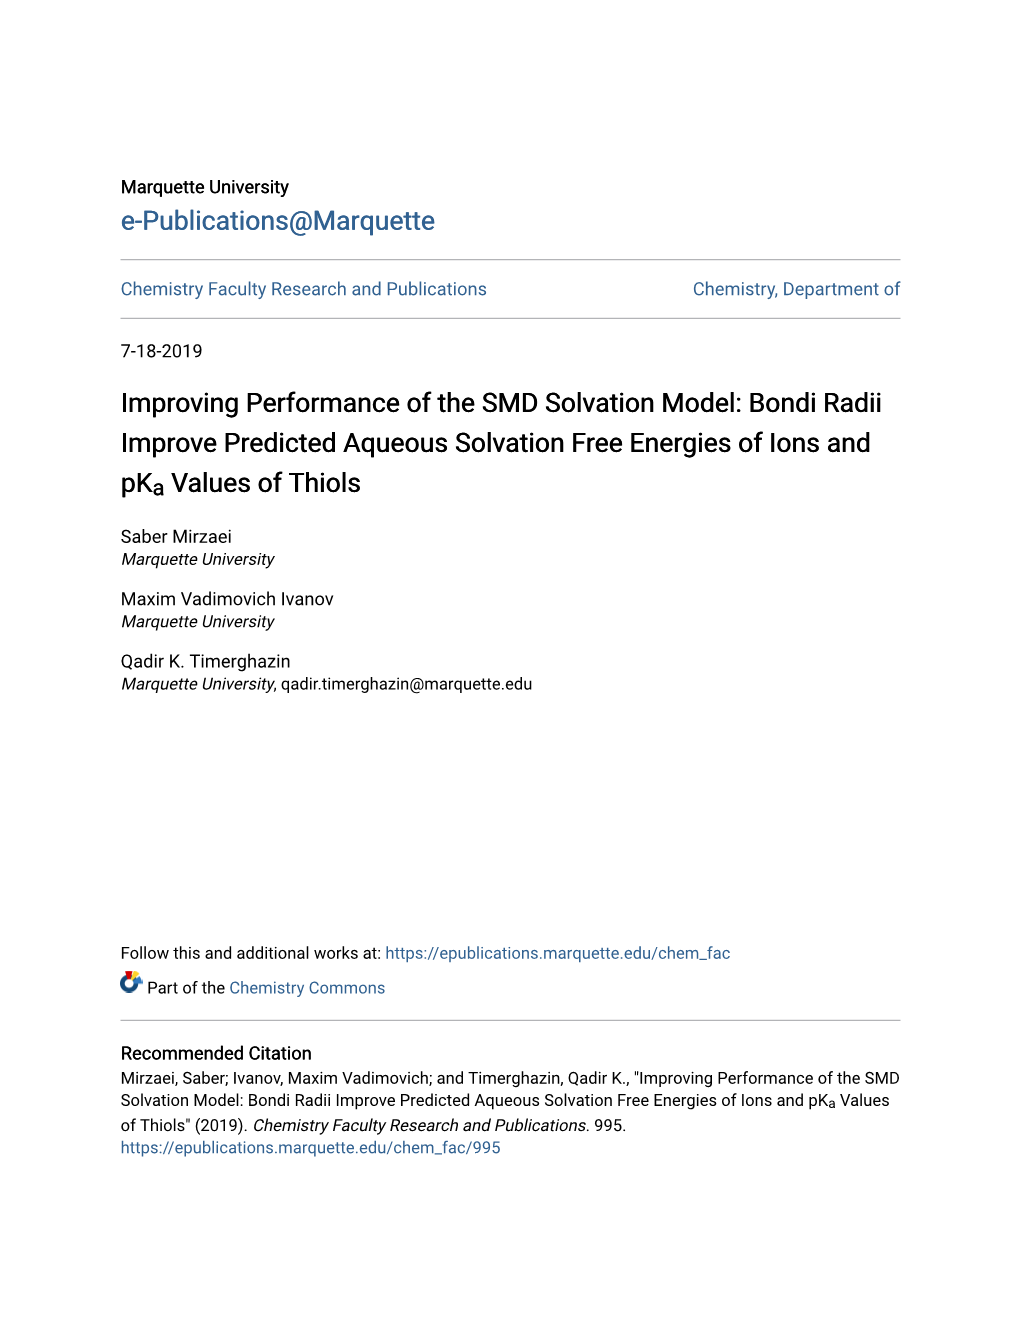 Improving Performance of the SMD Solvation Model: Bondi Radii Improve Predicted Aqueous Solvation Free Energies of Ions and Pka Values of Thiols